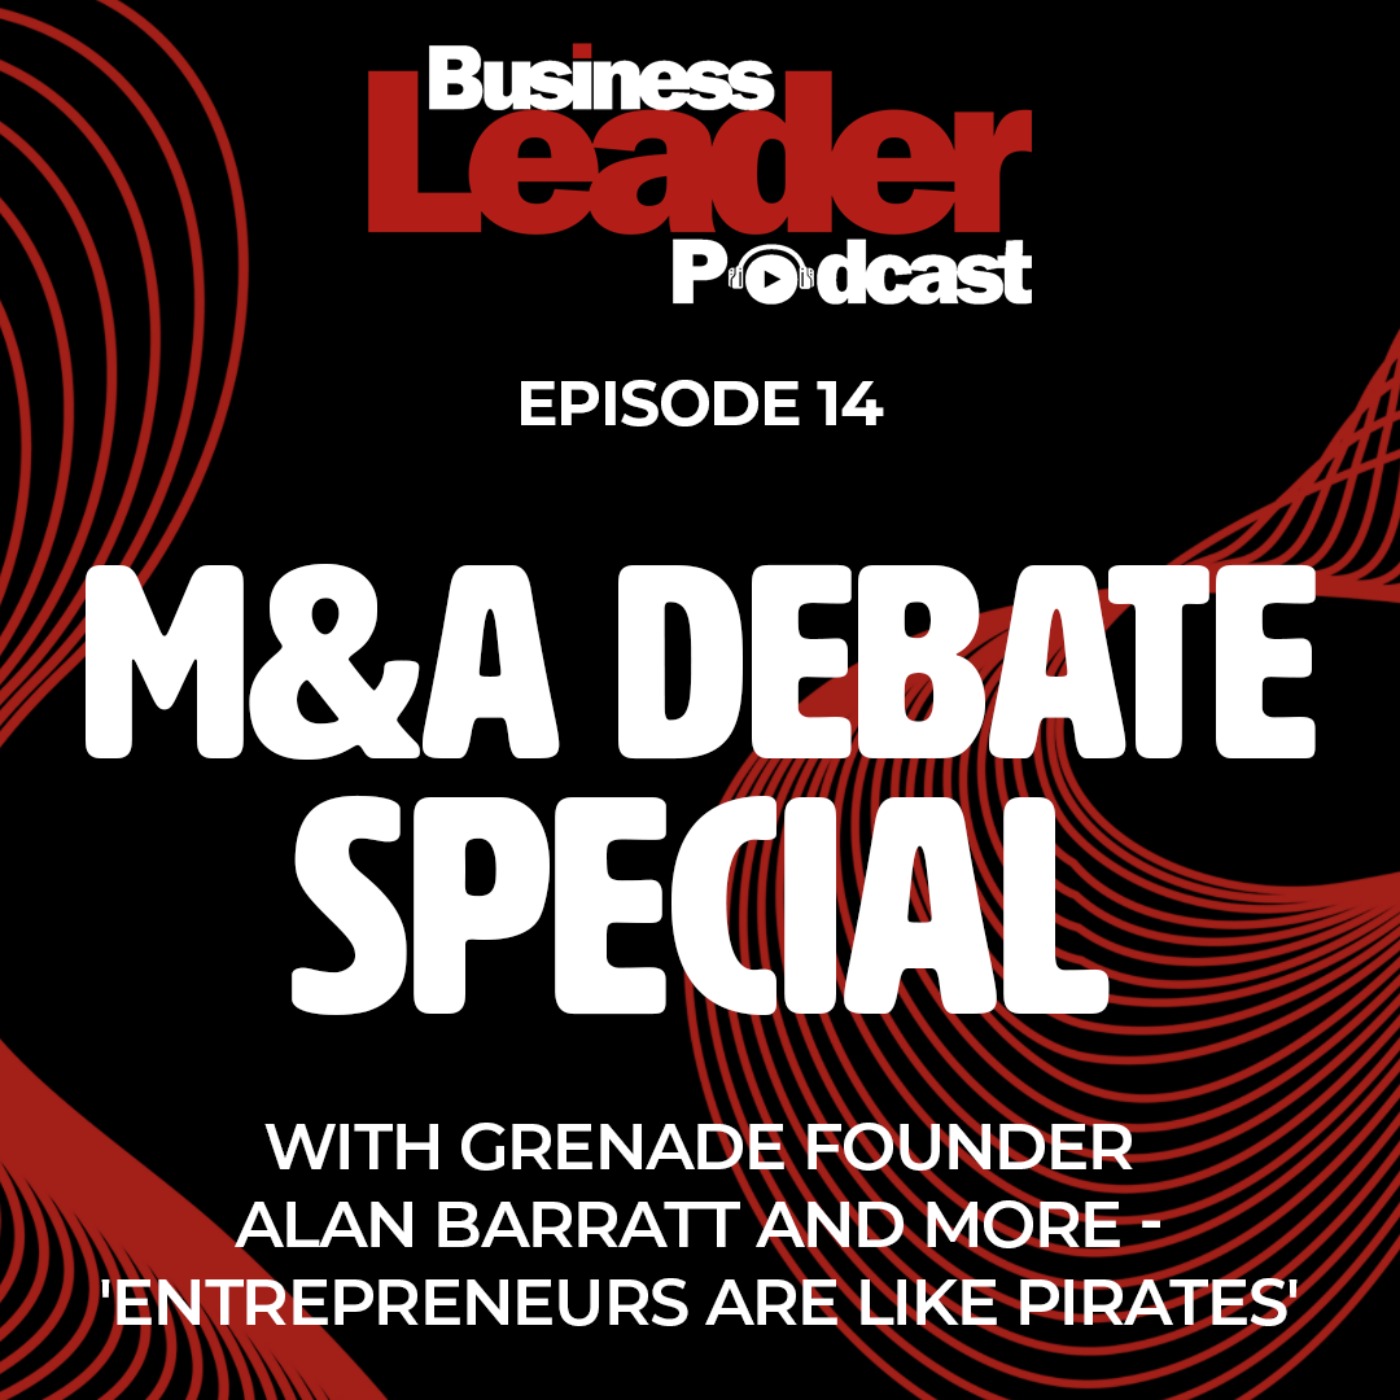 Live M&A debate with Grenade founder Alan Barratt and more - 'entrepreneurs are like Pirates'